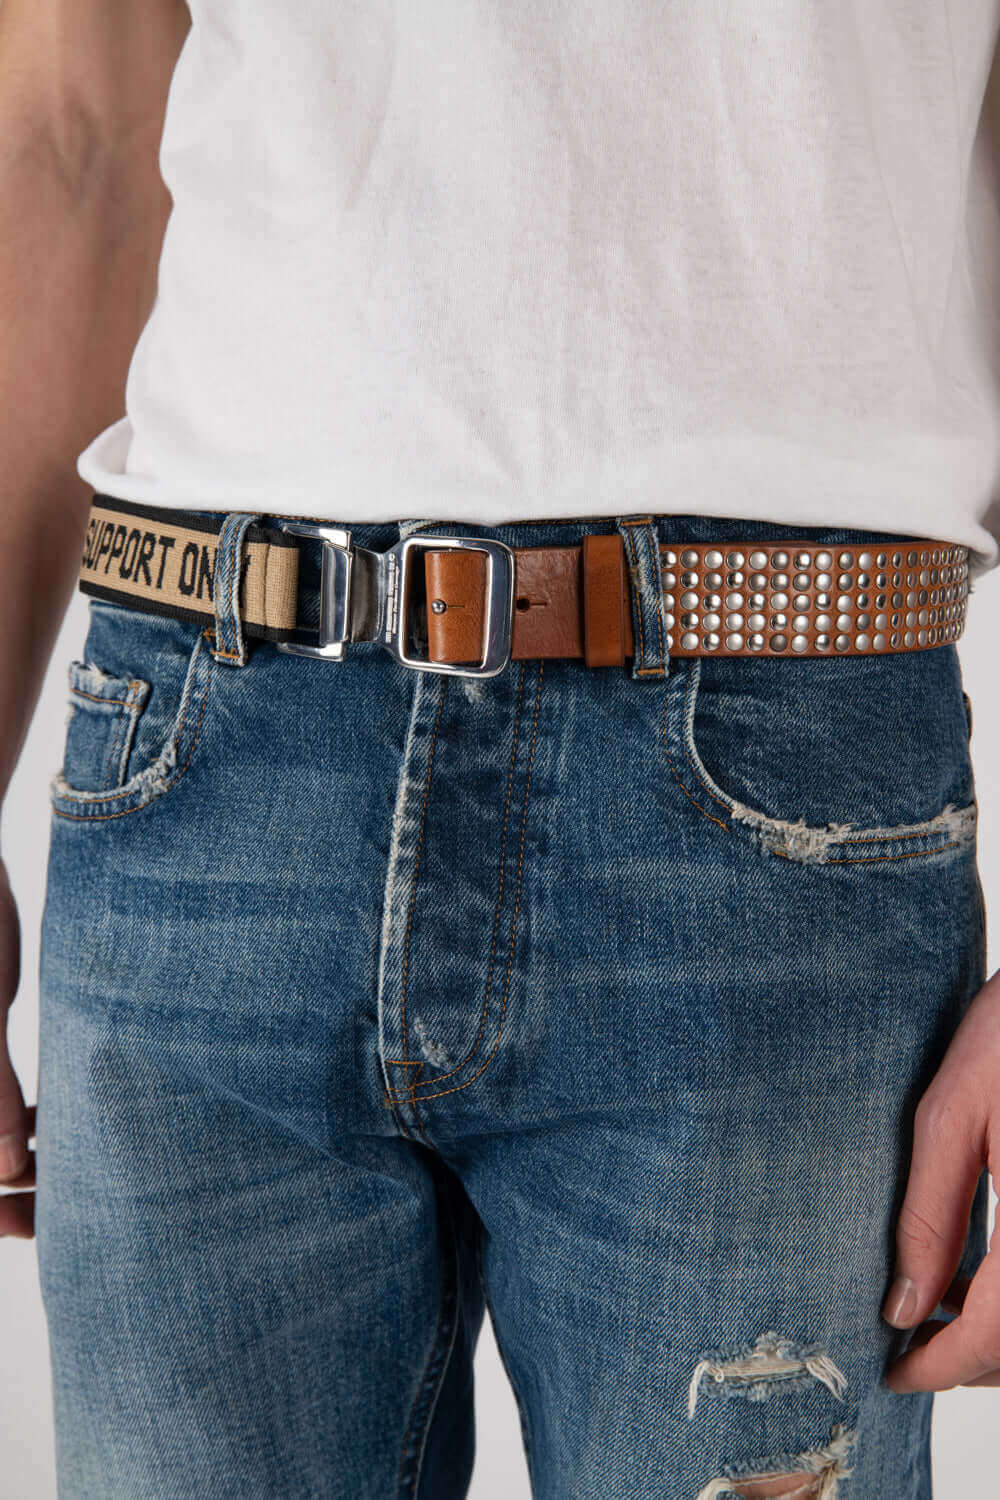 5.000 FASTEN BELT Studded leather belt & elastic band. Tension buckle closure. Height: 3,5 cm. Composition: 50% Leather 50% Polyester. Made in Italy HTC LOS ANGELES